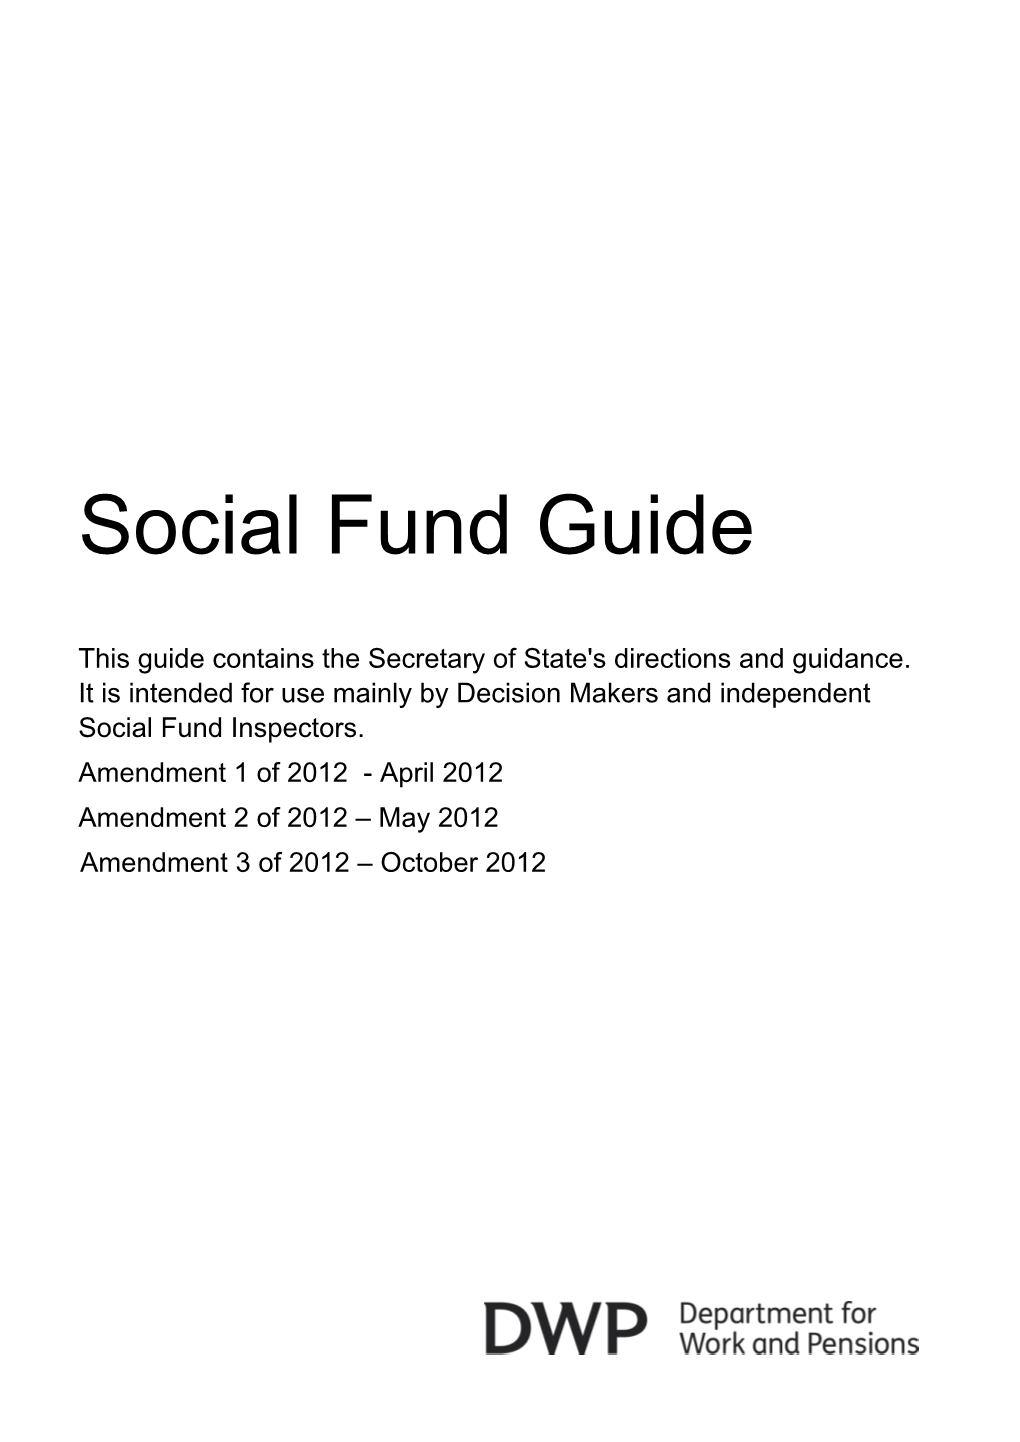 Social Fund Guide